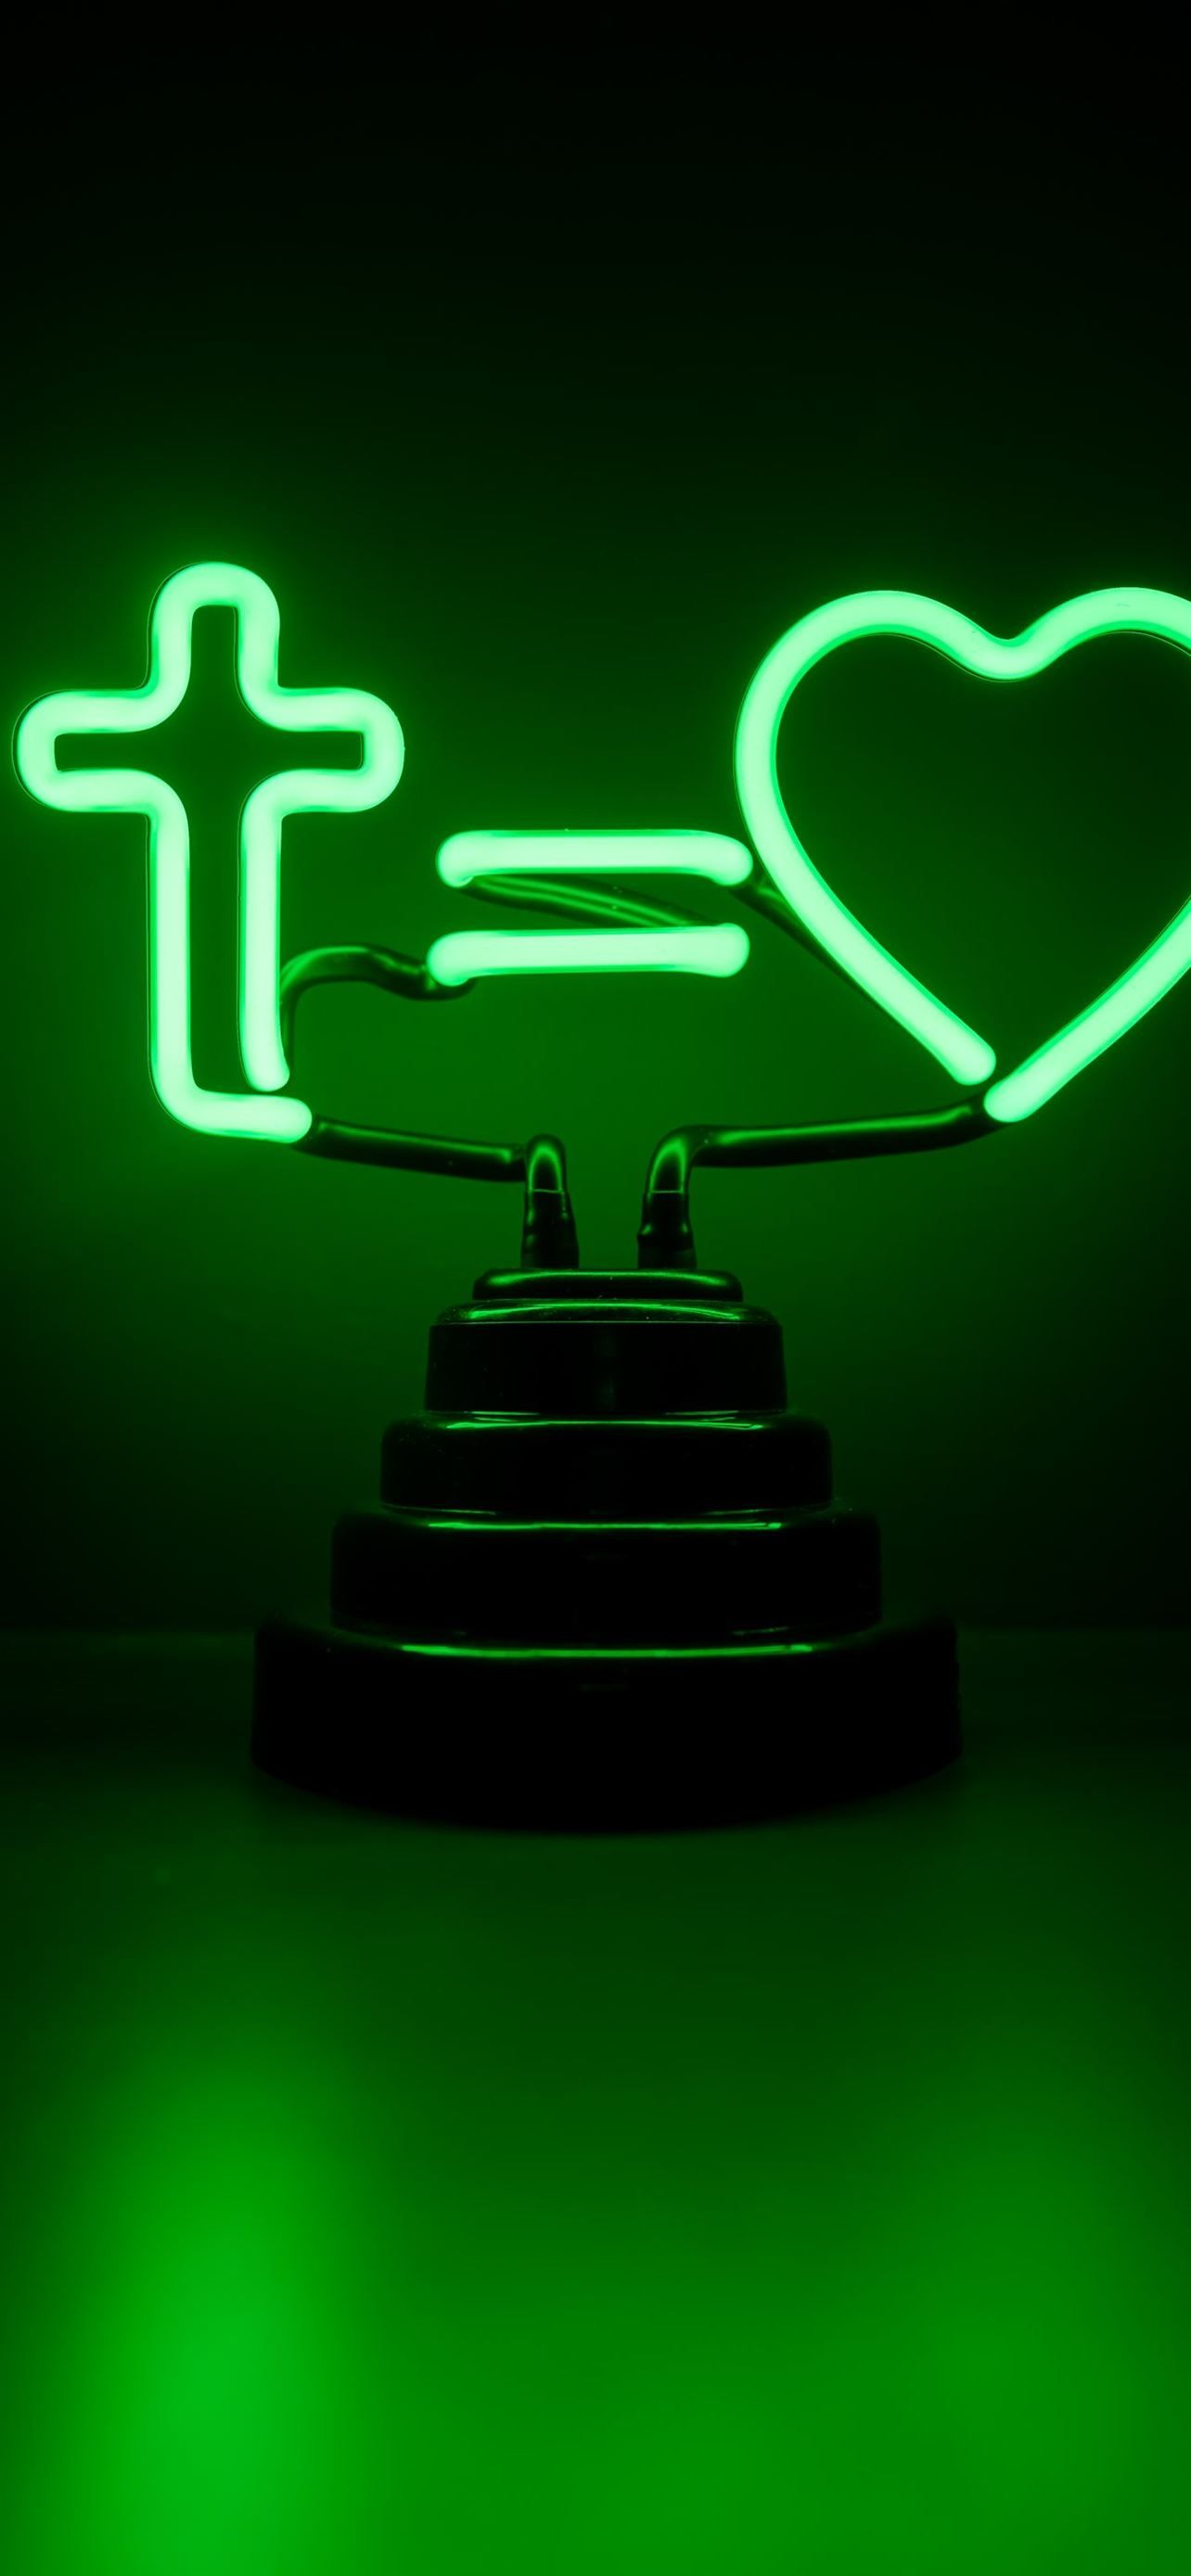 black cake with green light iPhone Wallpaper Free Download